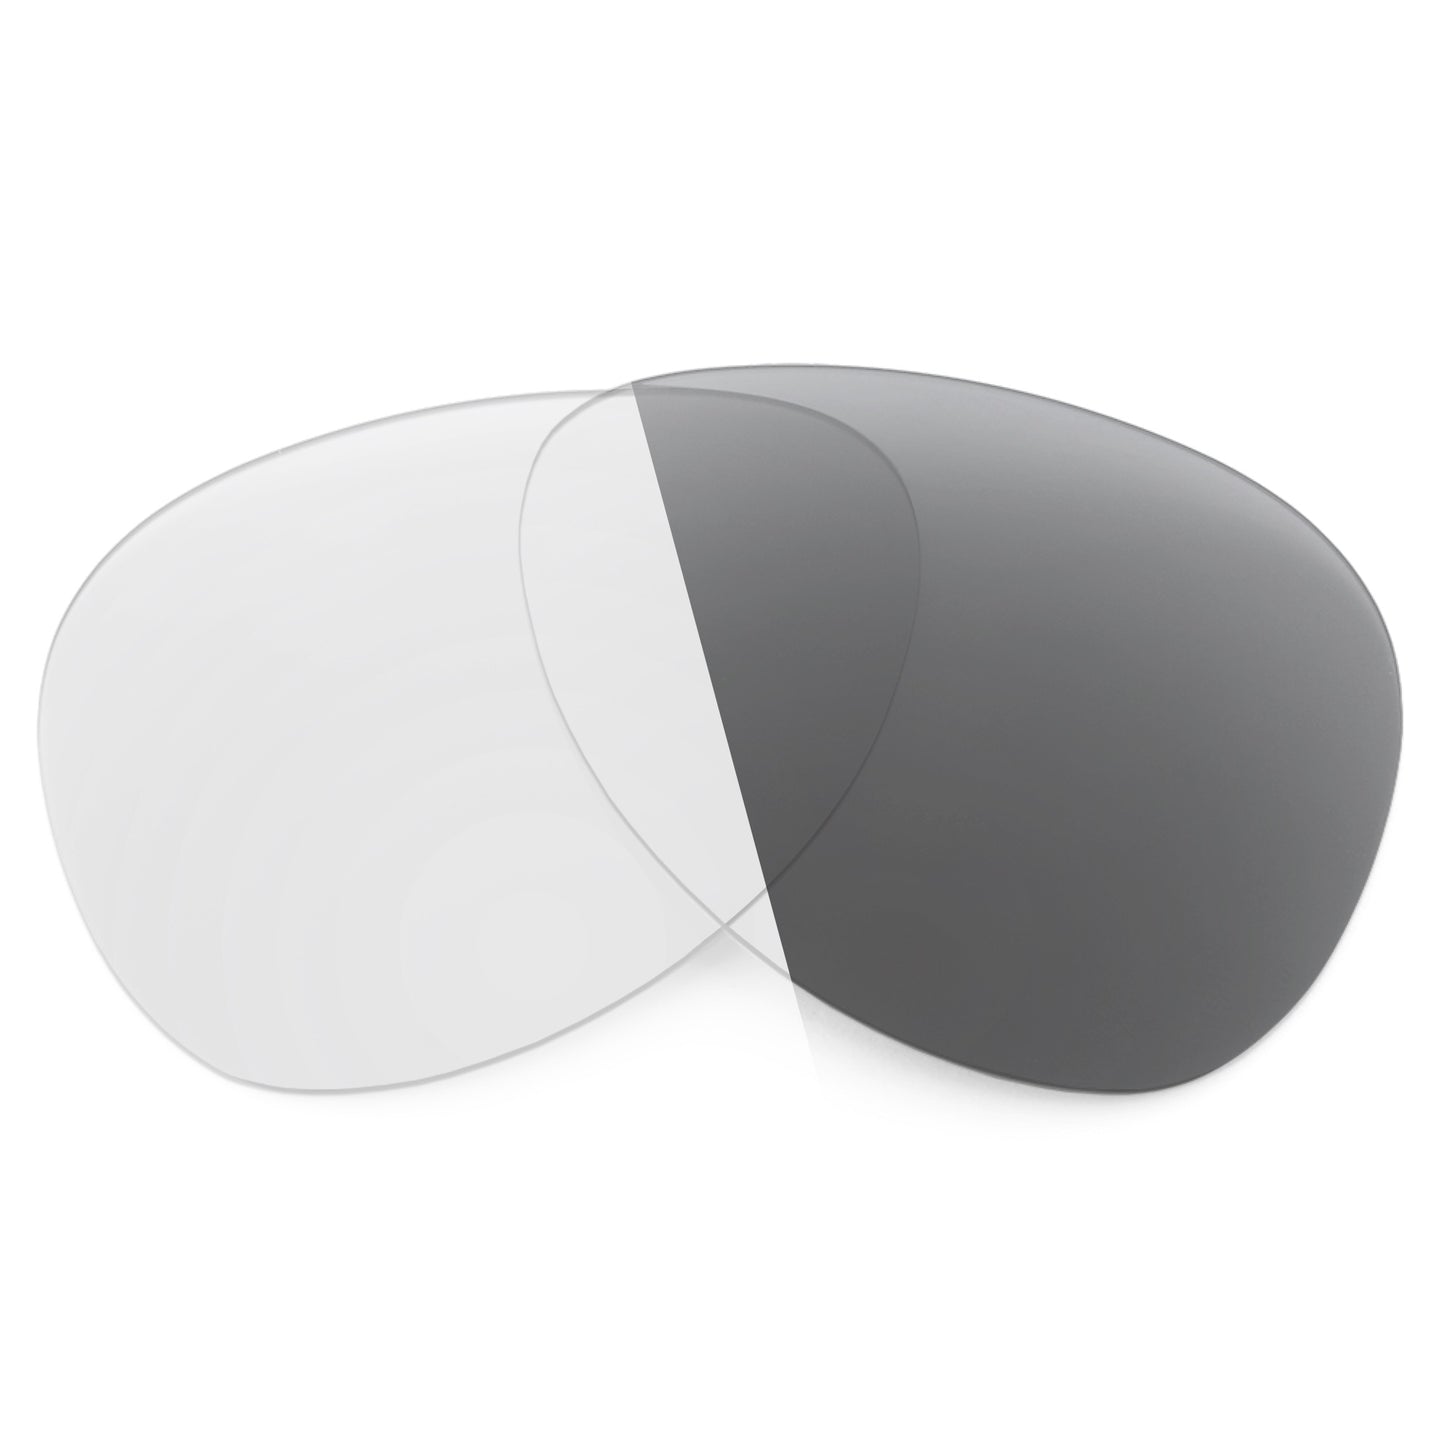 Revant replacement lenses for Ray-Ban New Aviator RB3625 58mm Non-Polarized Adapt Gray Photochromic